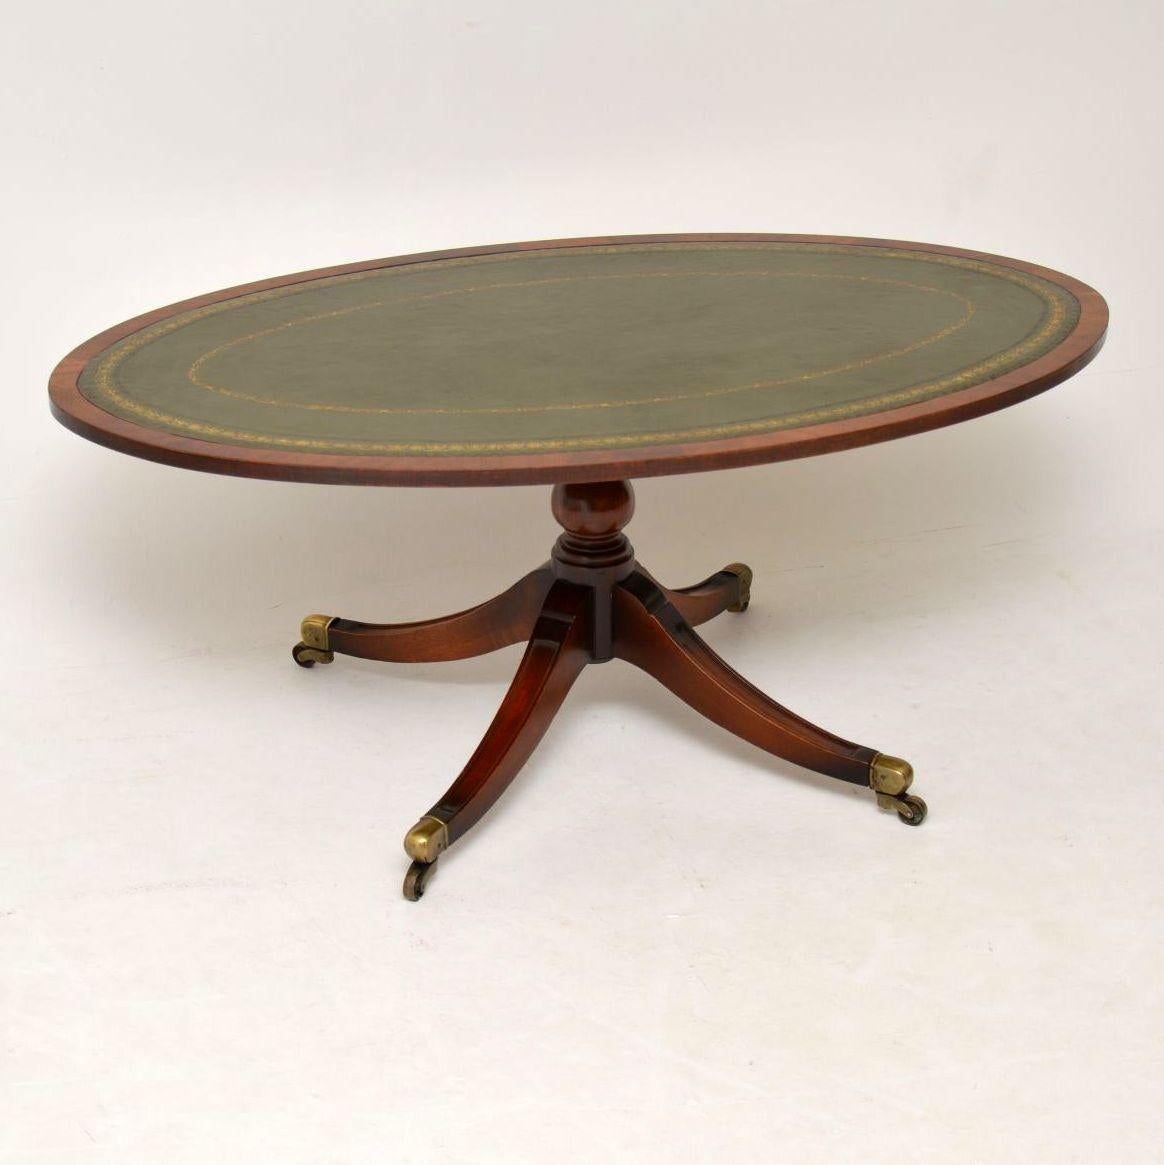 Antique Regency style mahogany coffee table with a tooled leather oval top. It’s in excellent condition and dates to around the 1930s-1950s period. It’s very sturdy and sits on a boldly turned pedestal with four sabre legs and brass capped casters.